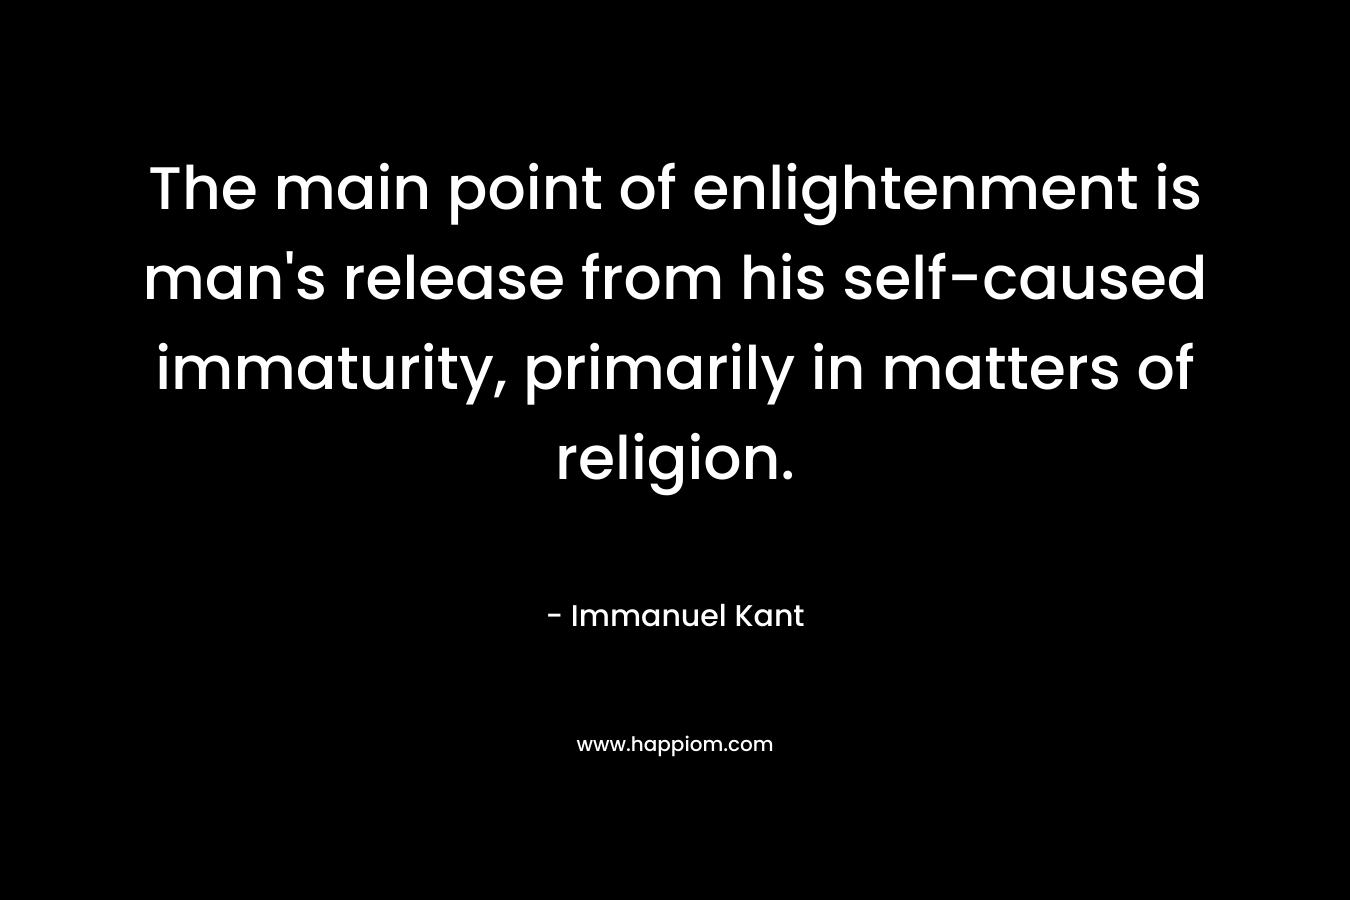 The main point of enlightenment is man’s release from his self-caused immaturity, primarily in matters of religion. – Immanuel Kant